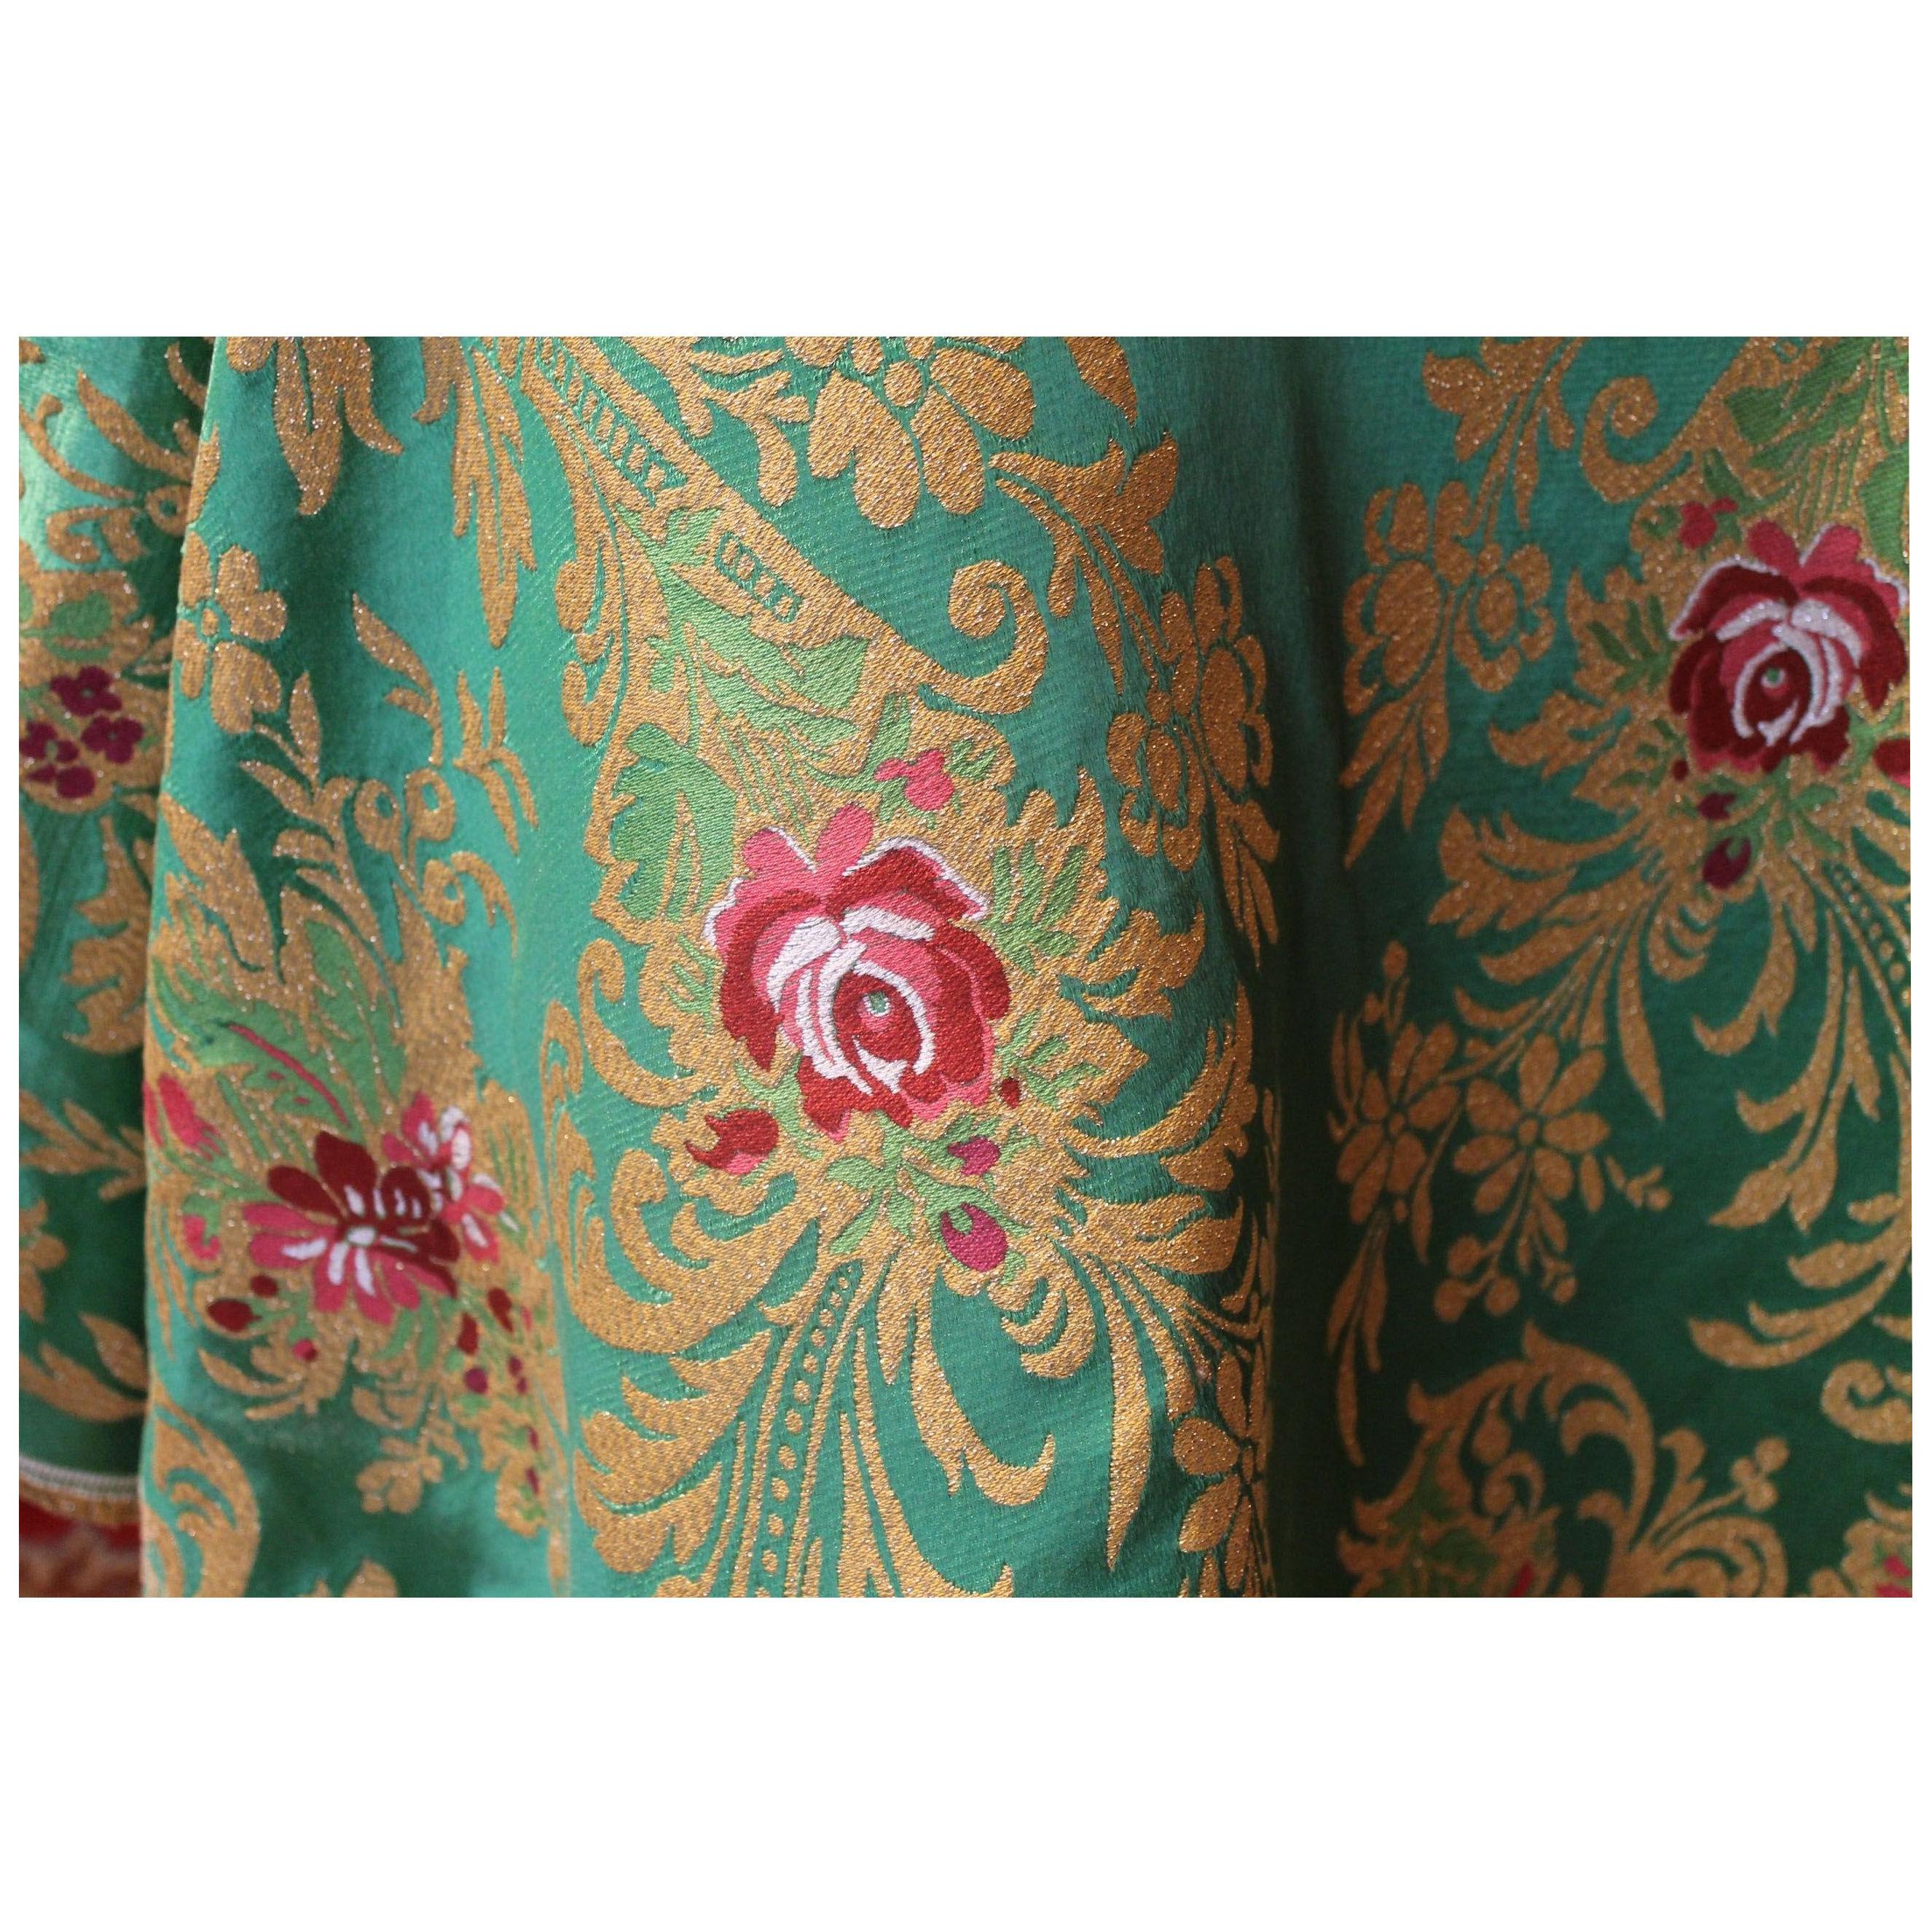 Italian Green Silk Blend Brocade Fabric with Red Roses and Gold Floral Patterns